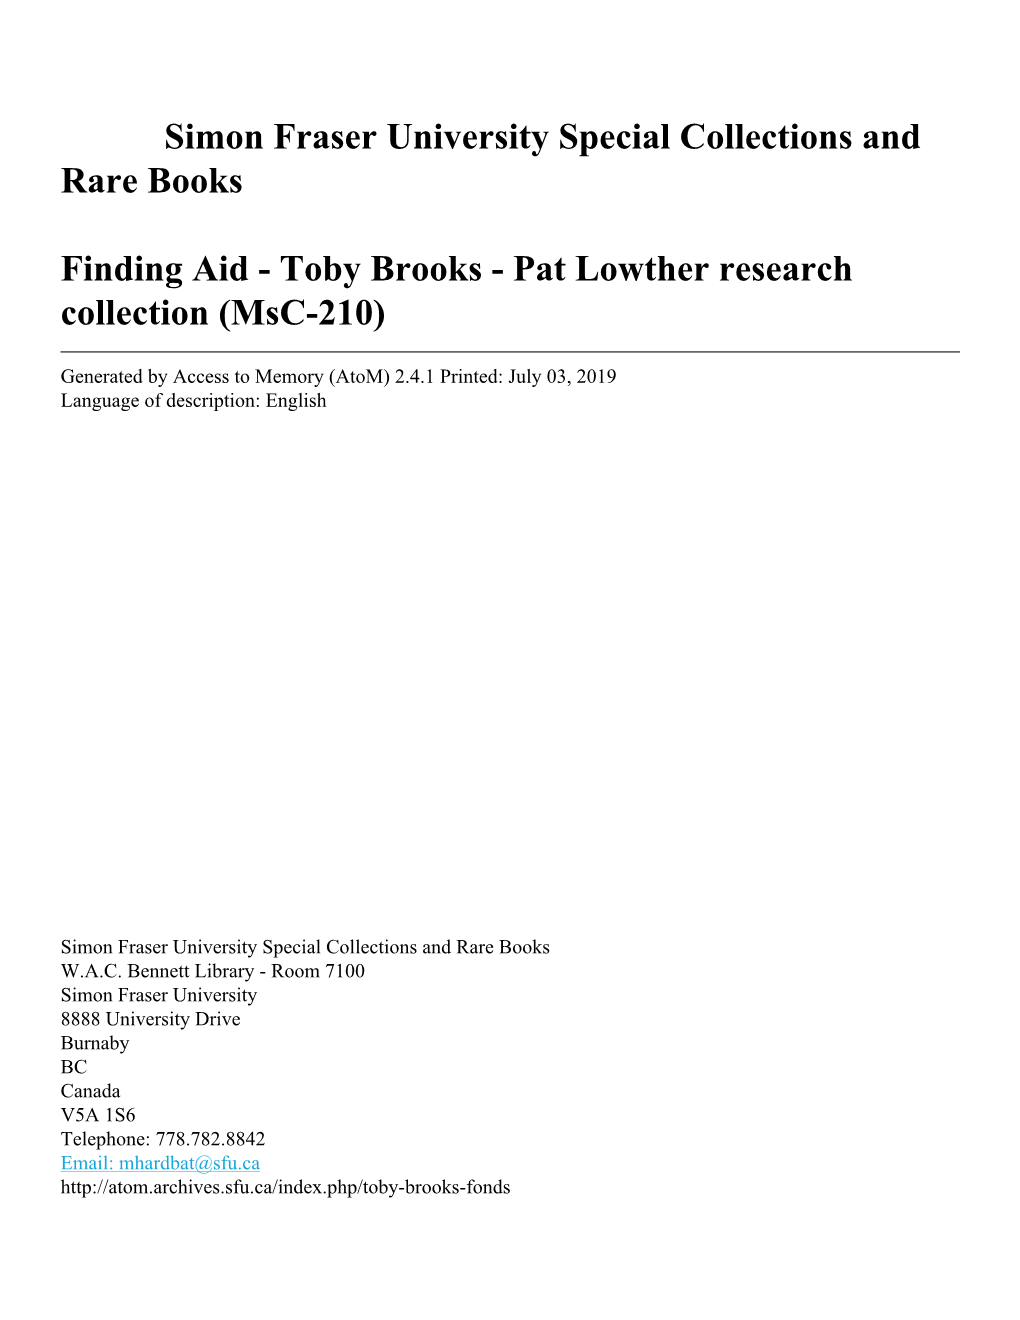 Pat Lowther Research Collection (Msc-210)